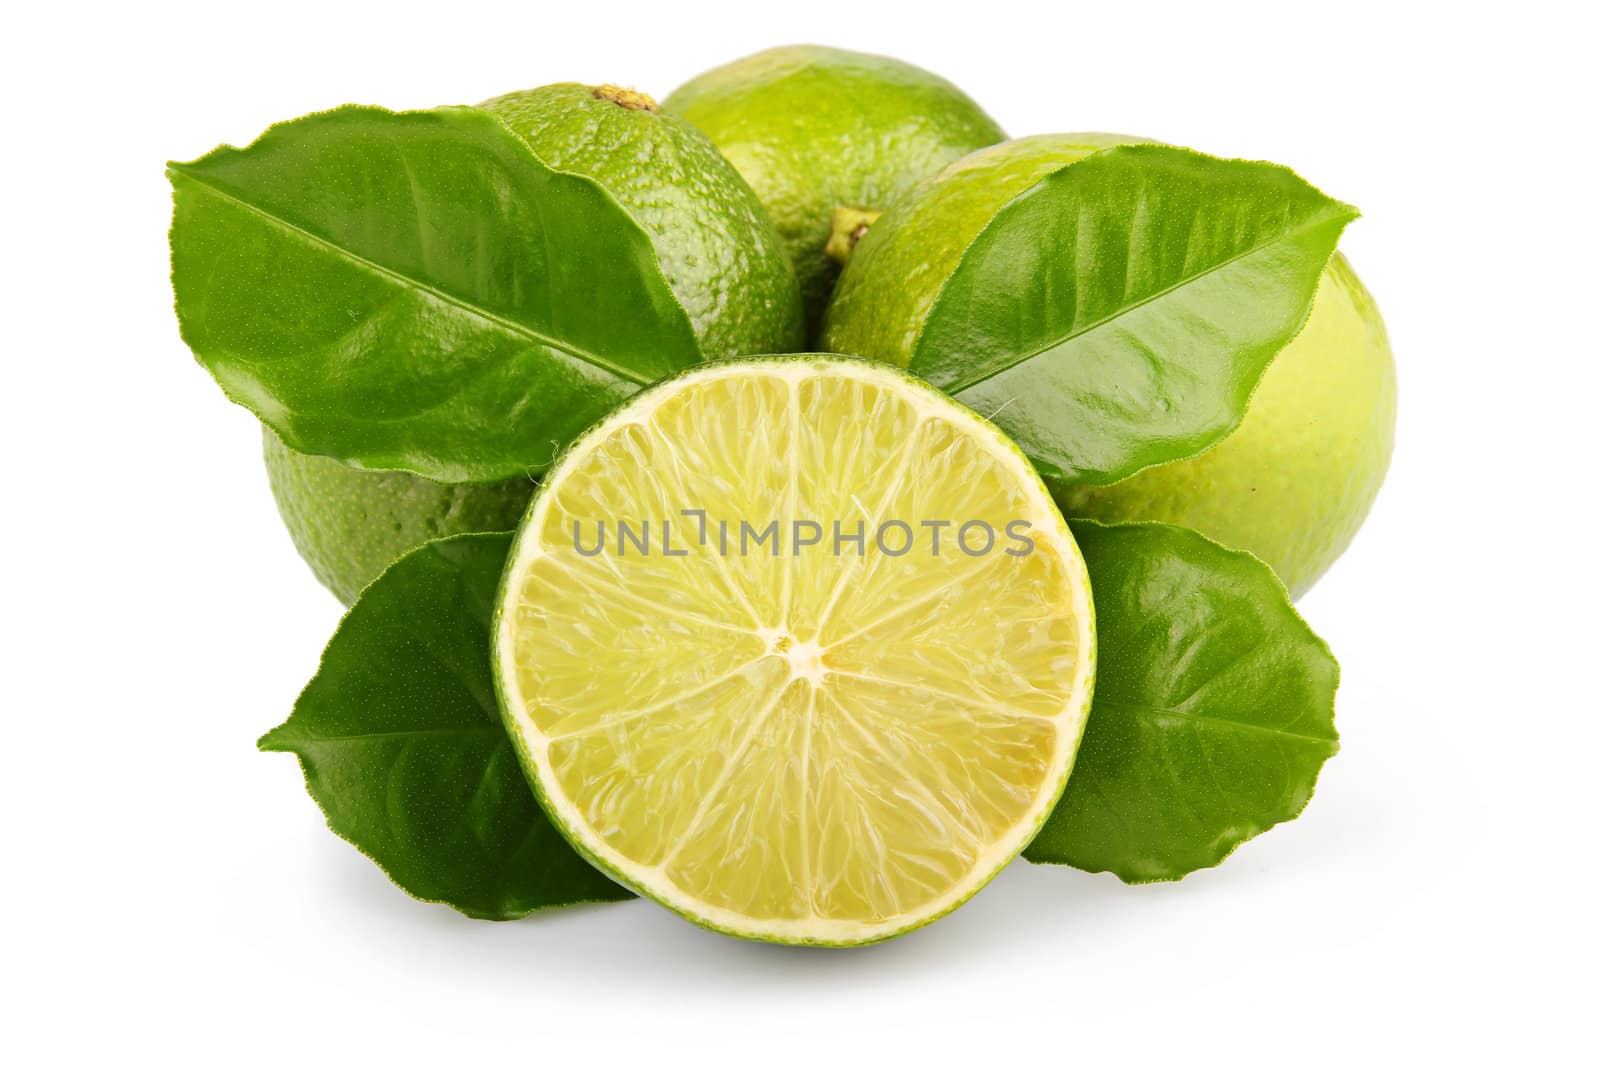 Ripe lime fruits with green leaves isolated on white background 